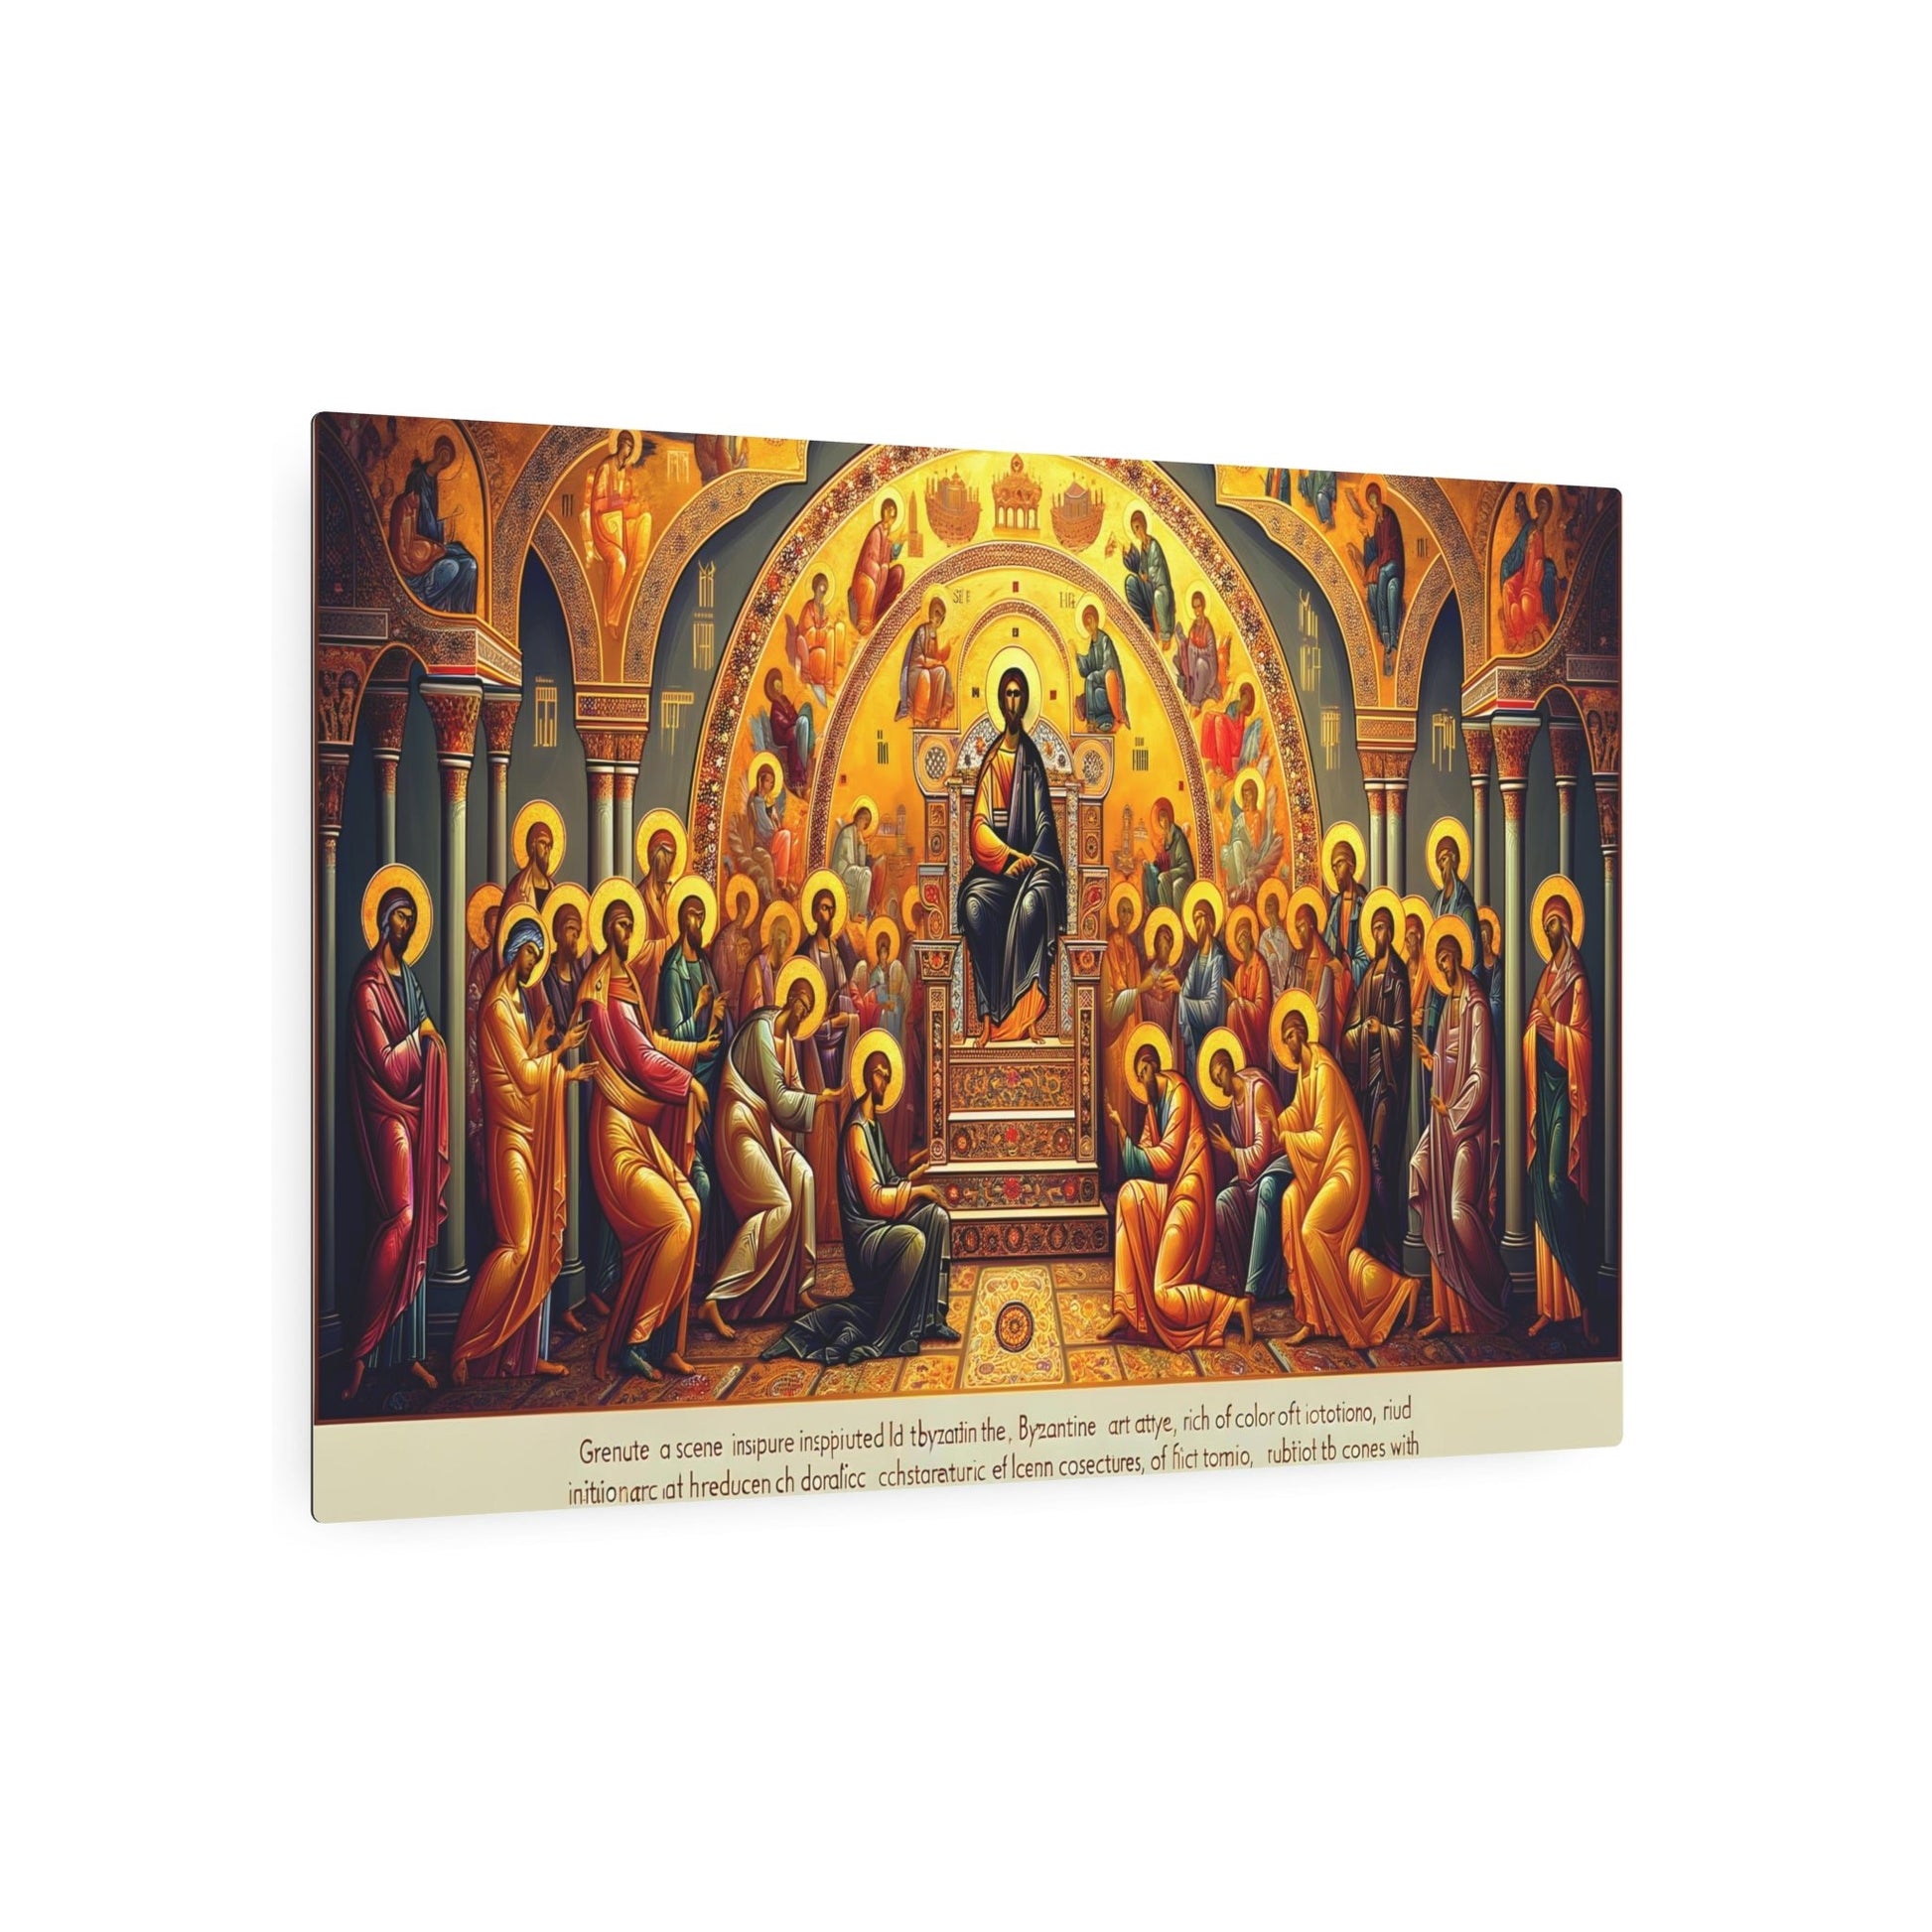 Metal Poster Art | "Byzantine Art Style Image: Traditional Iconography with Vibrant Gold & Rich Color Tones - Non-Western & Global Styles, Byzantine - Metal Poster Art 36″ x 24″ (Horizontal) 0.12''